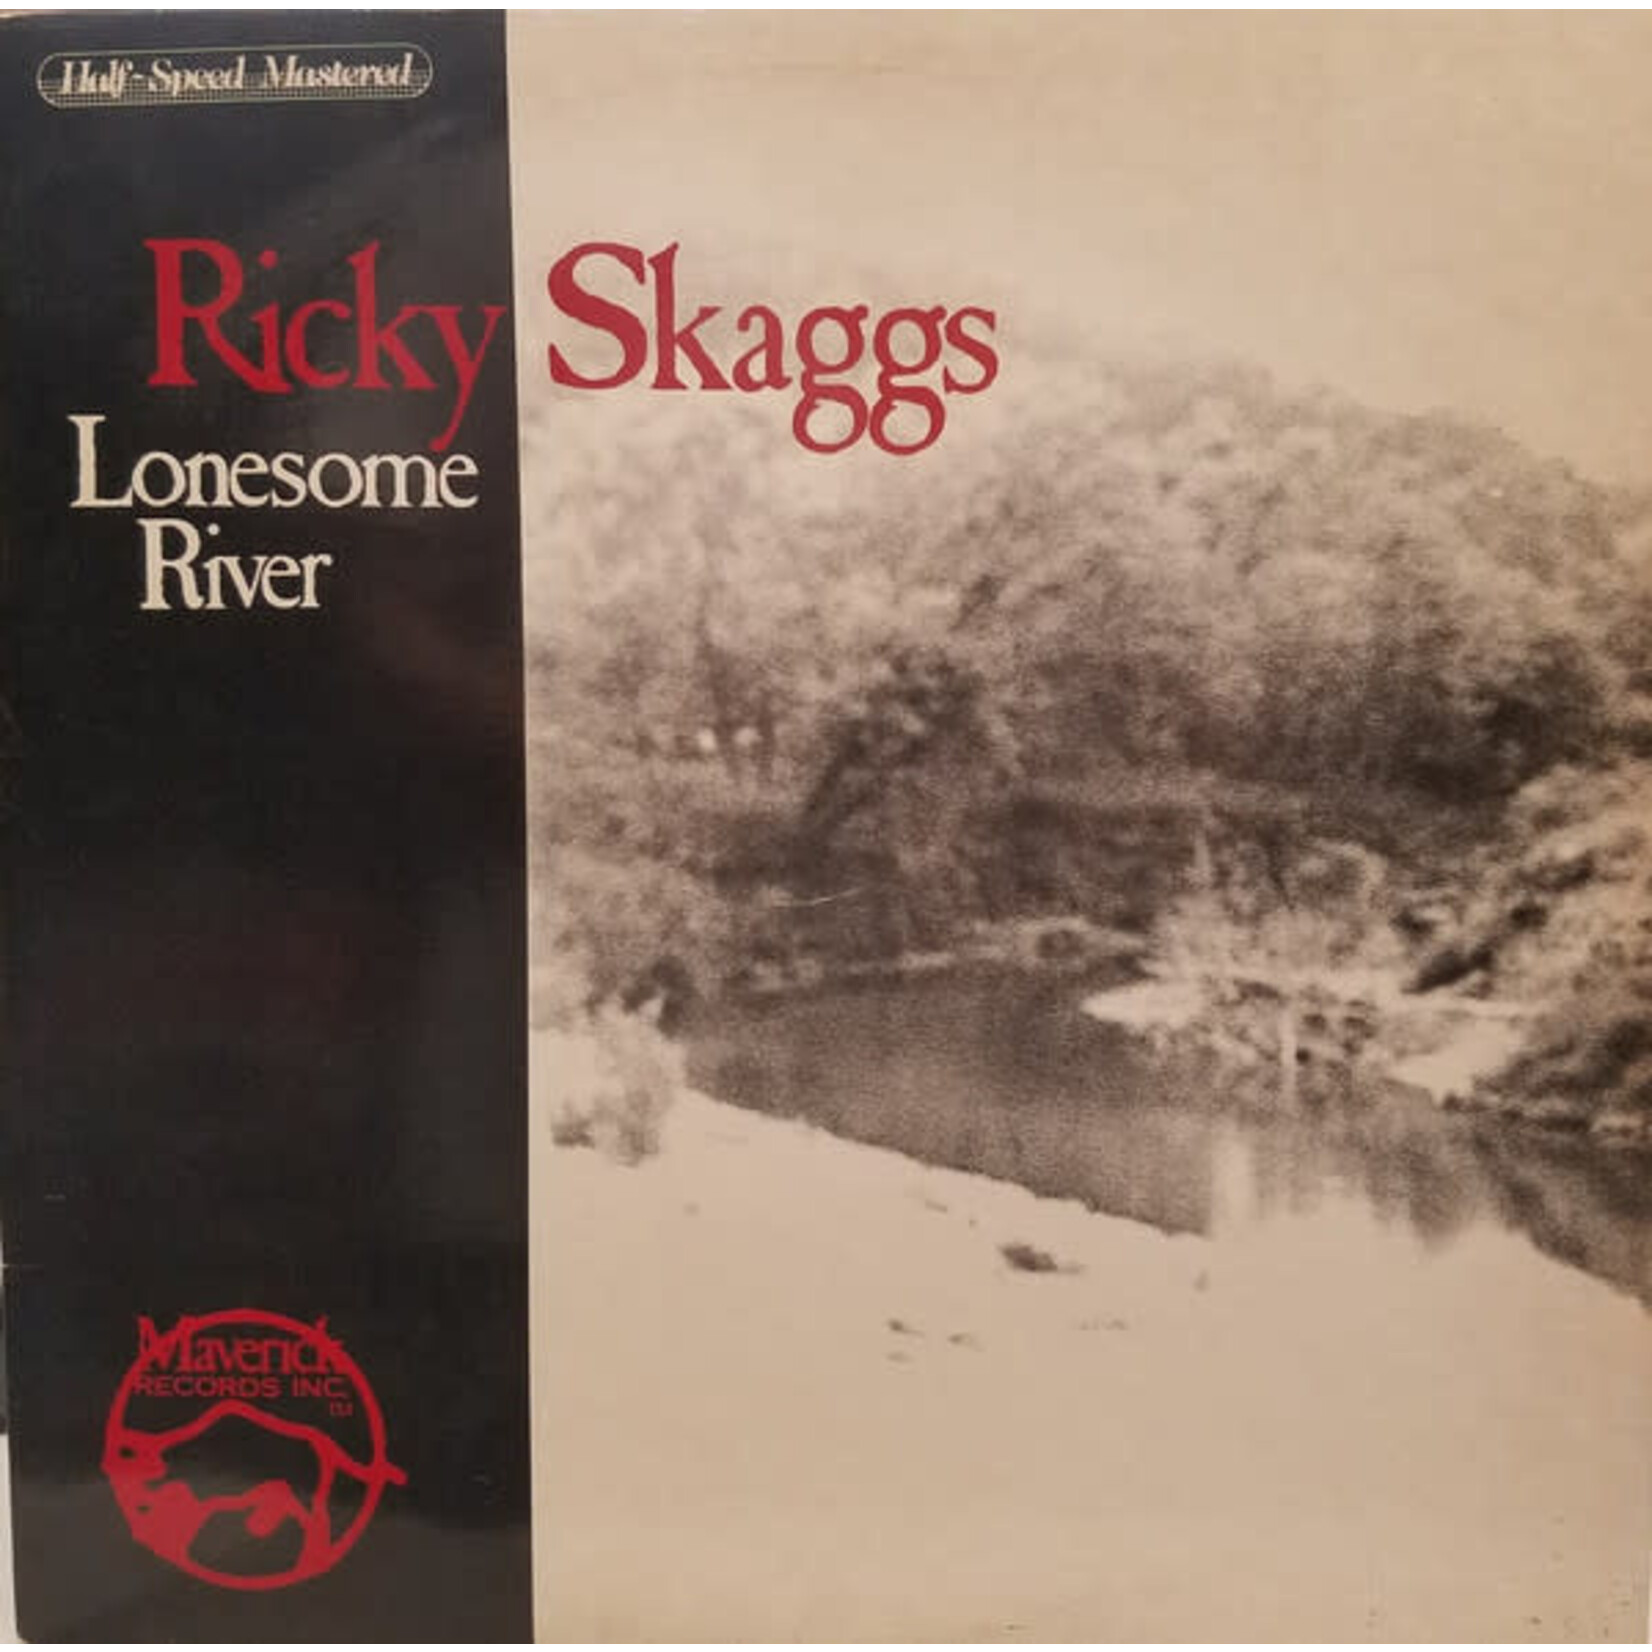 Ricky Skaggs Ricky Skaggs – Lonesome River (Ralph Stanley And The Clinch Mountain Boys) (VG, 1983, LP, Half Speed Mastered, Maverick Records Inc. – MLP 1002)